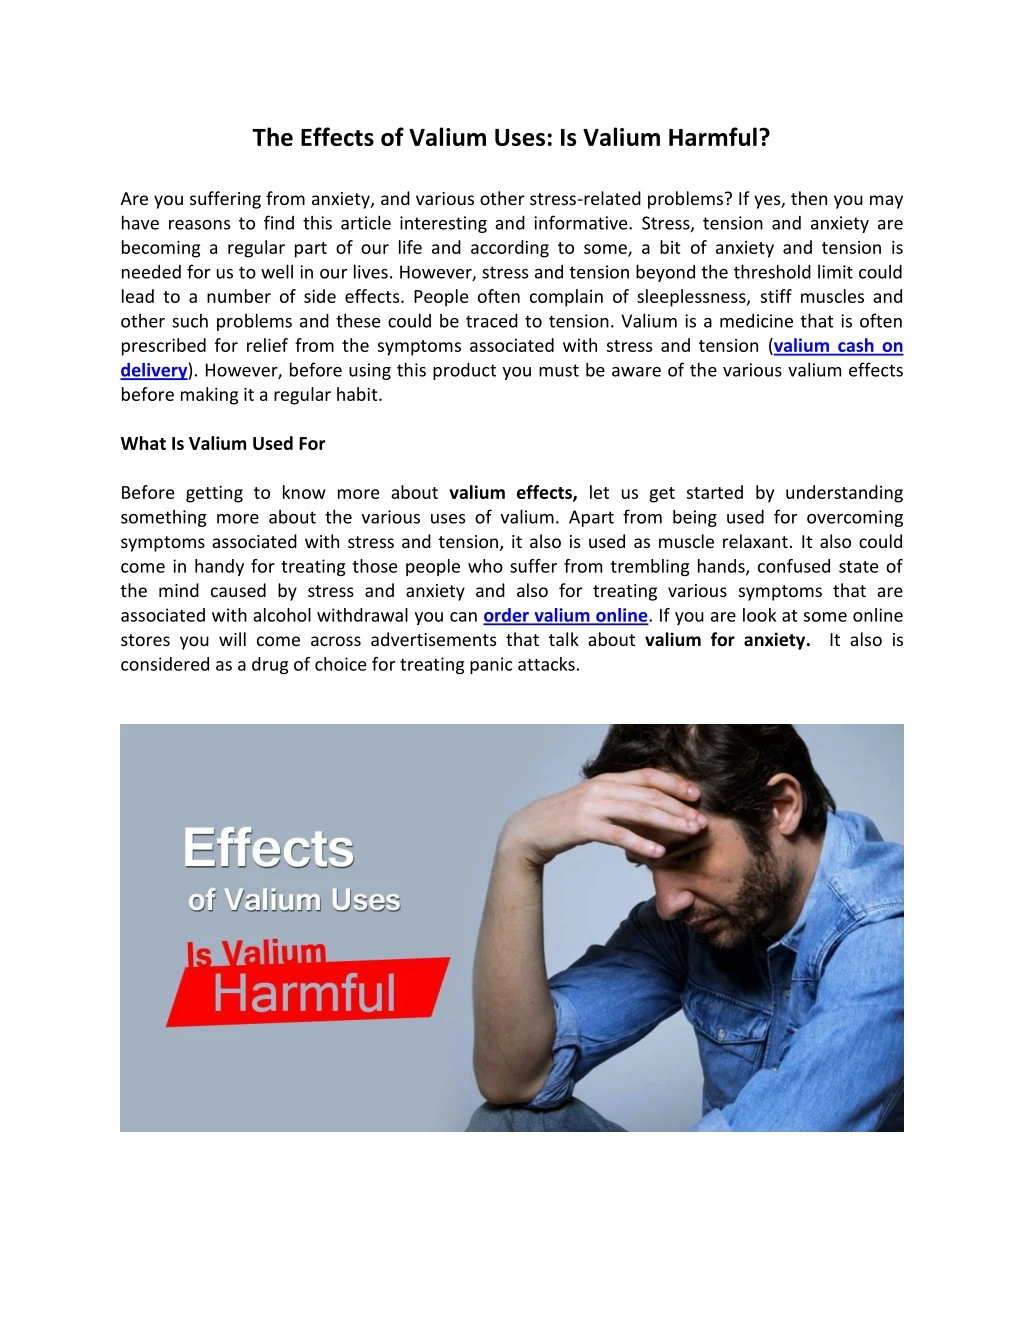 the effects of valium uses is valium harmful